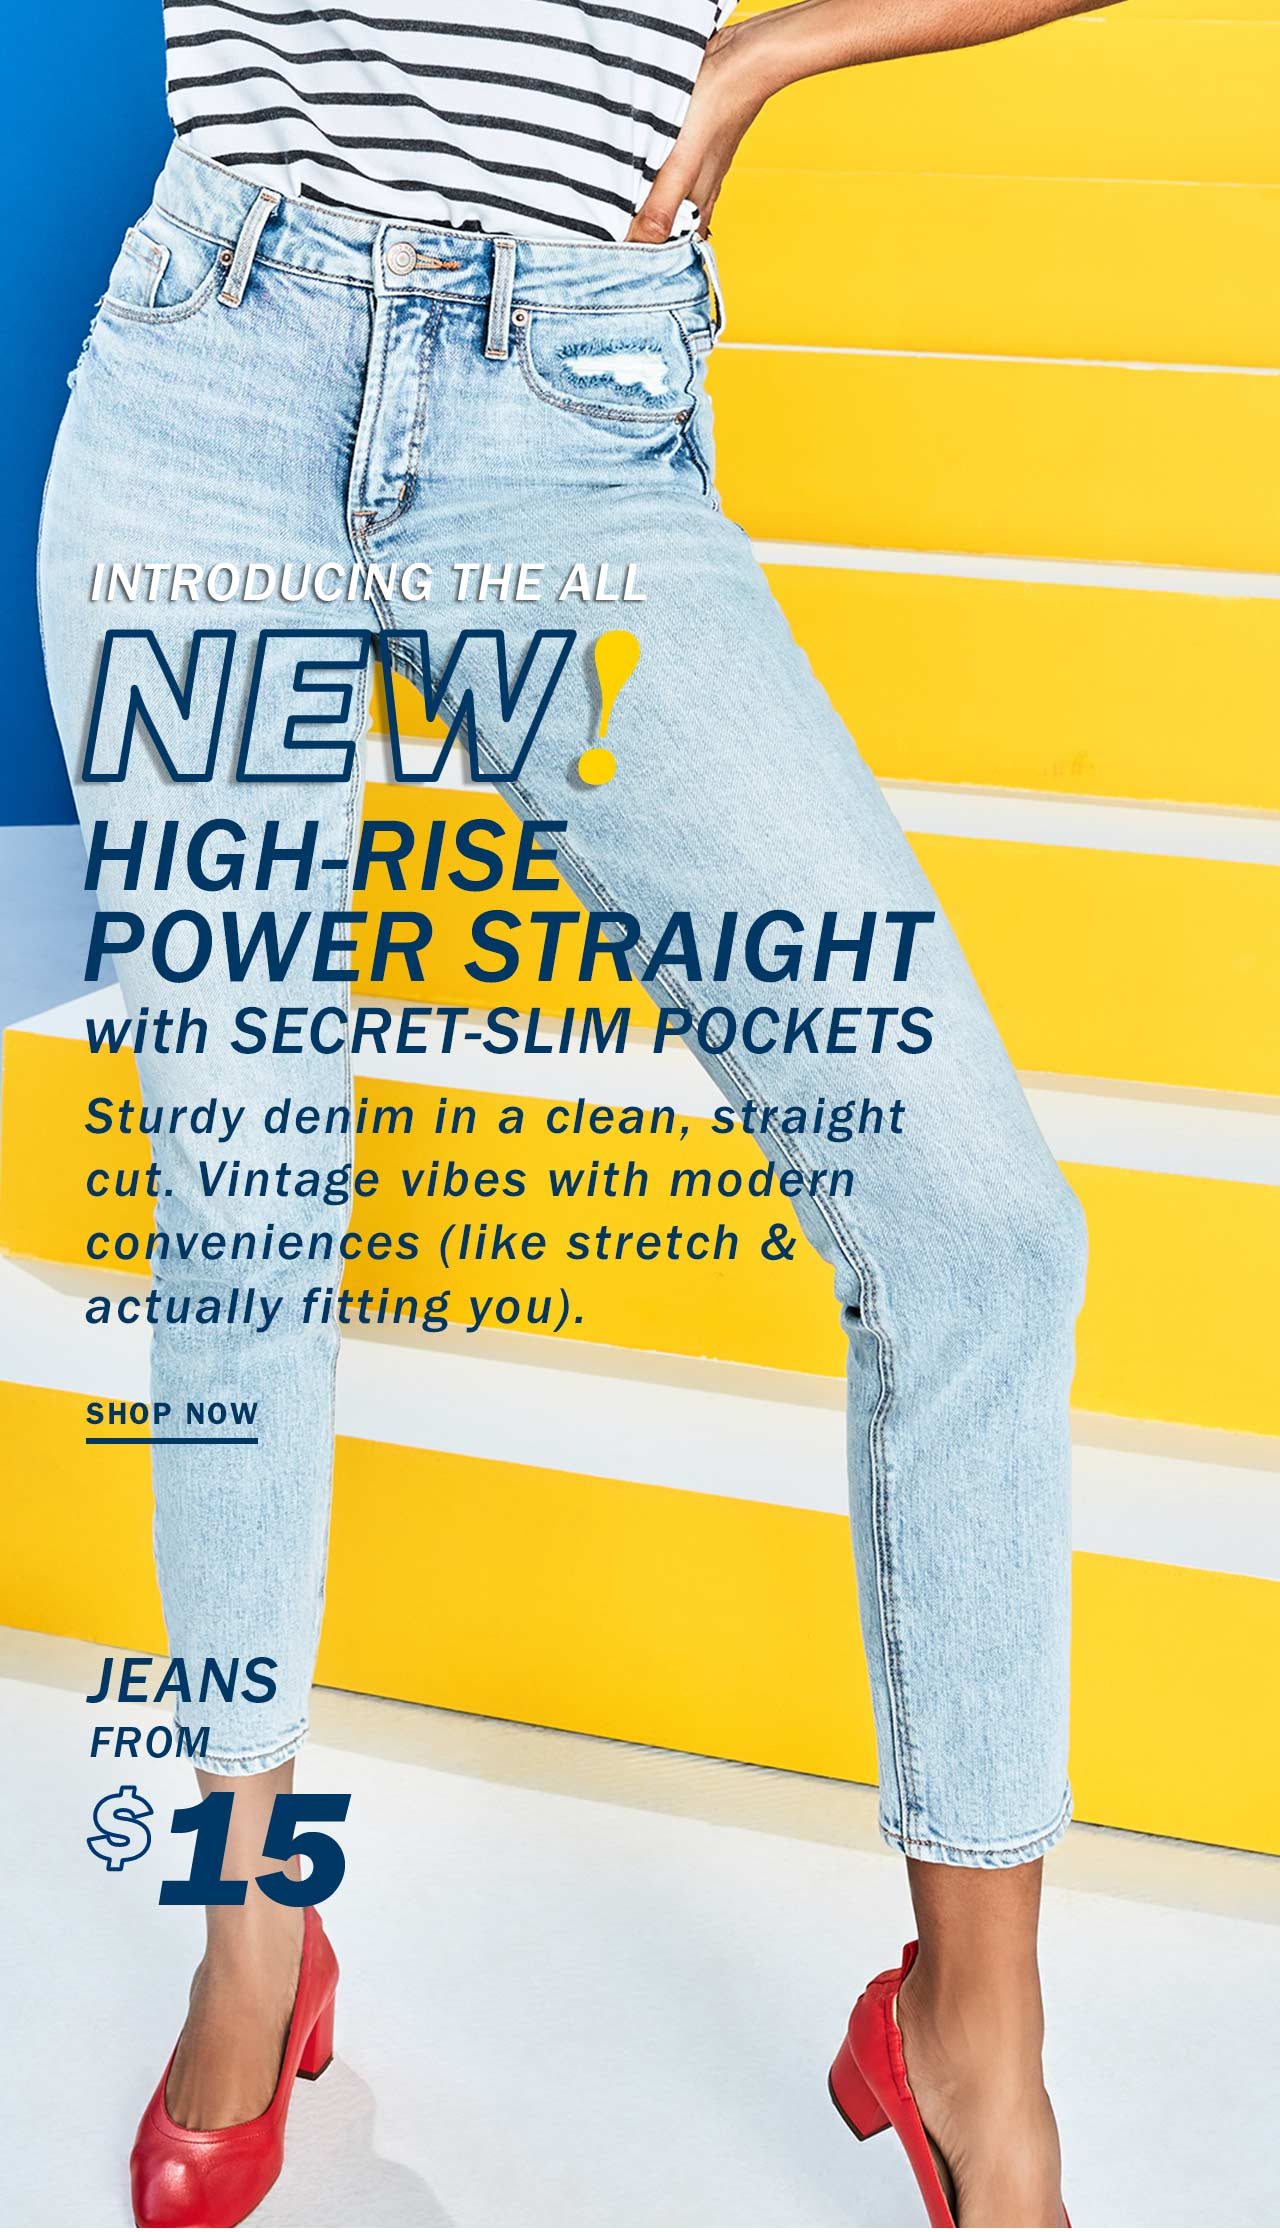 NEW! HIGH-RISE POWER STRAIGHT